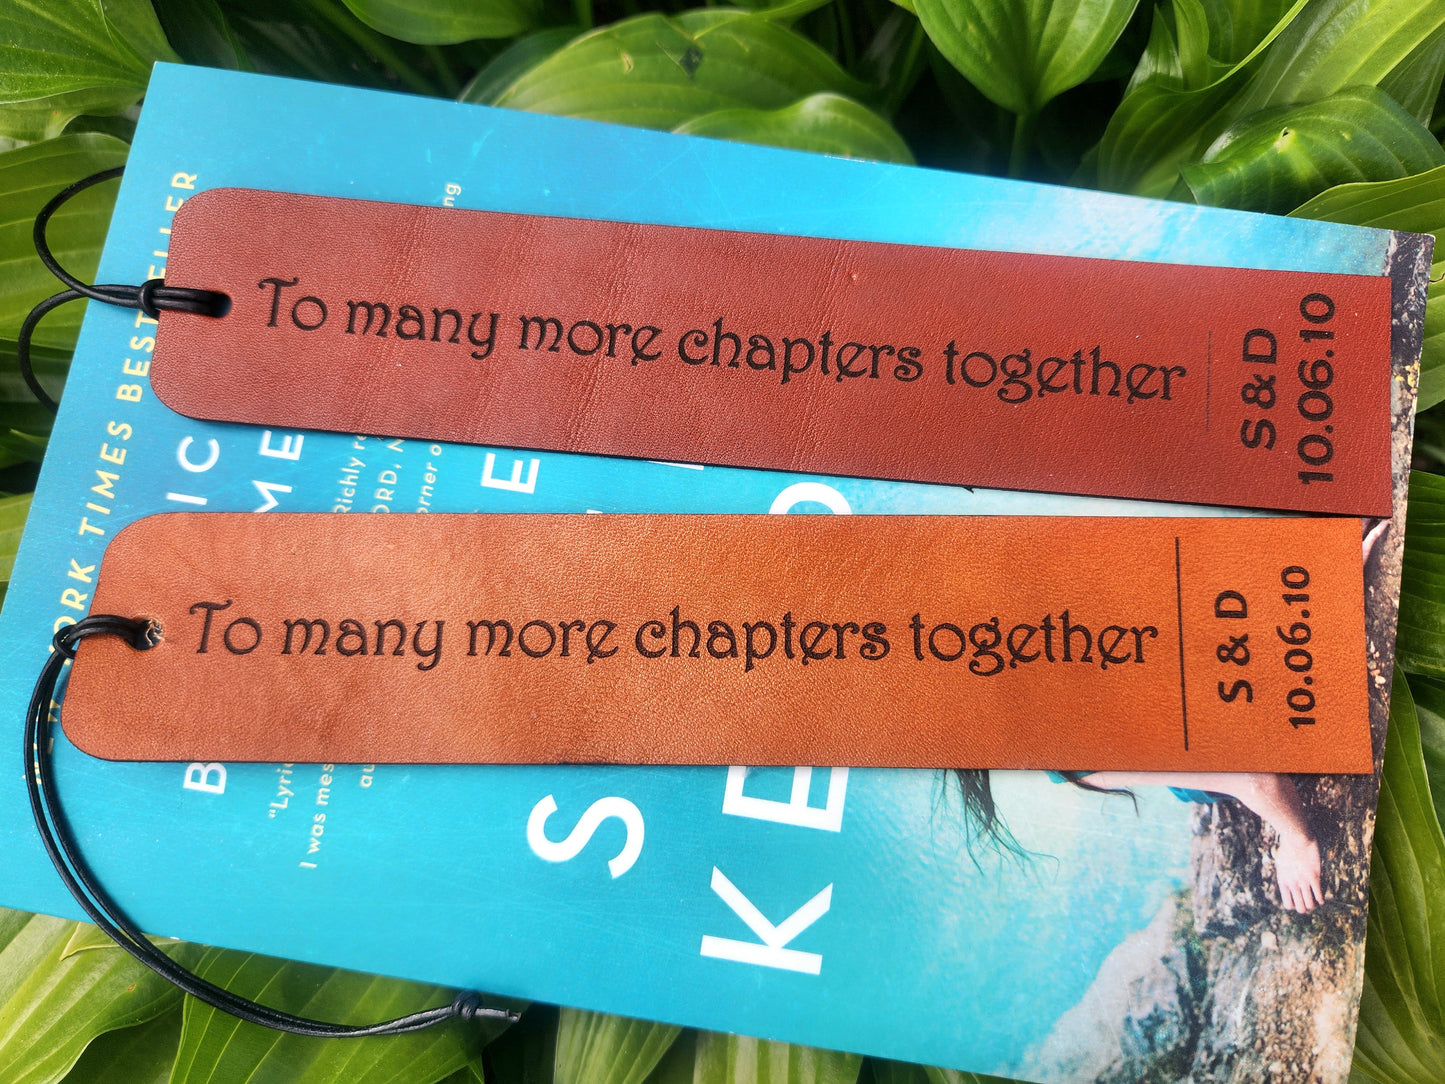 Couples Initials personalized book mark - To many more chapters